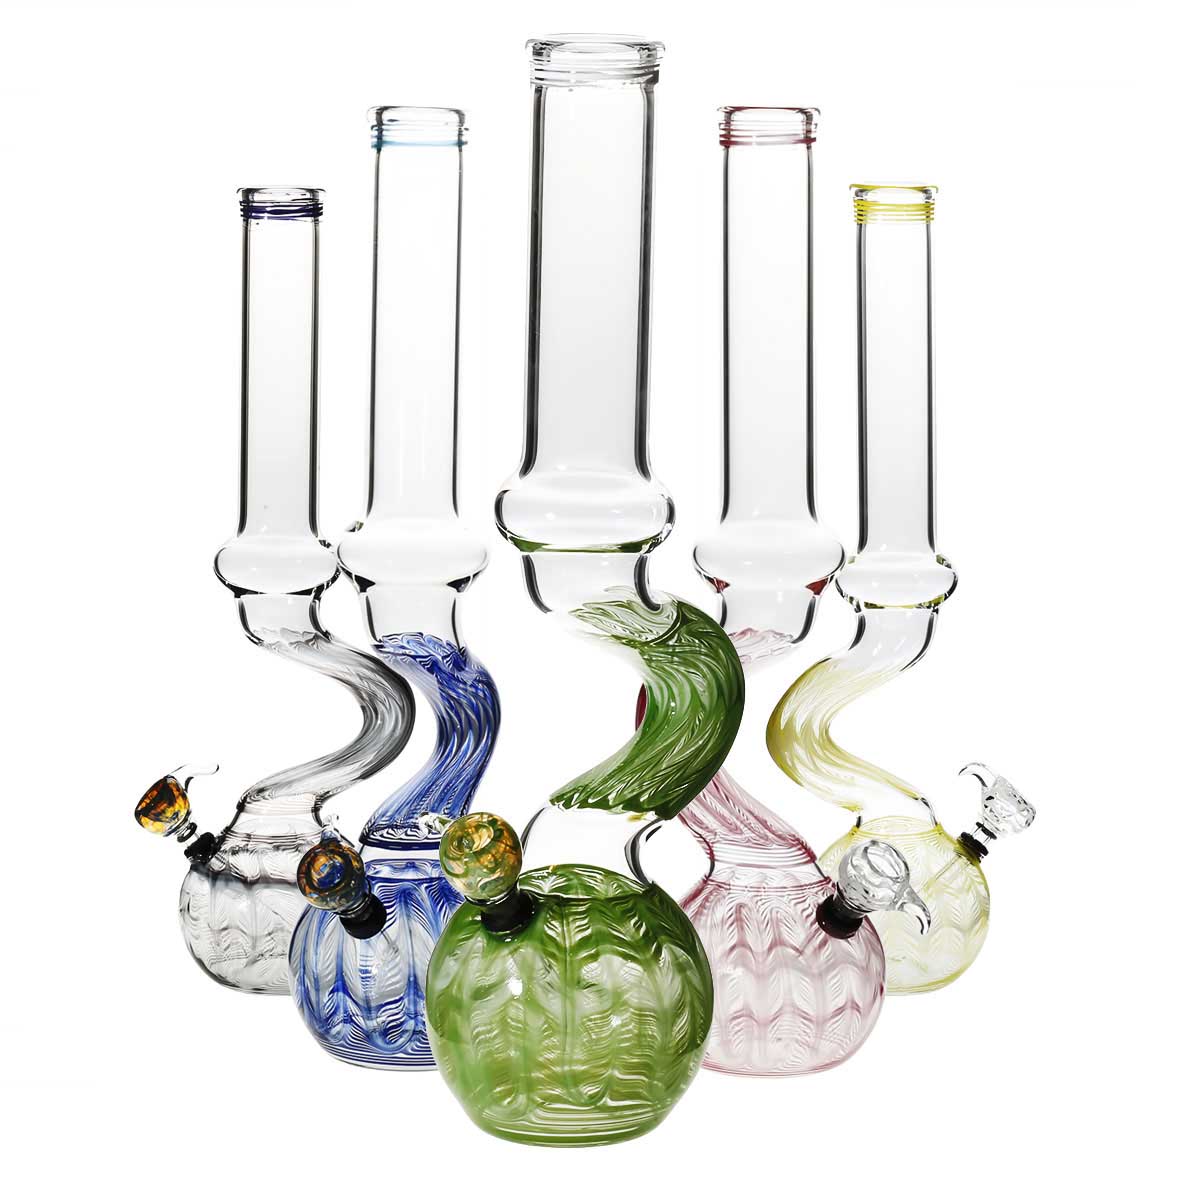 curved neck glass bong